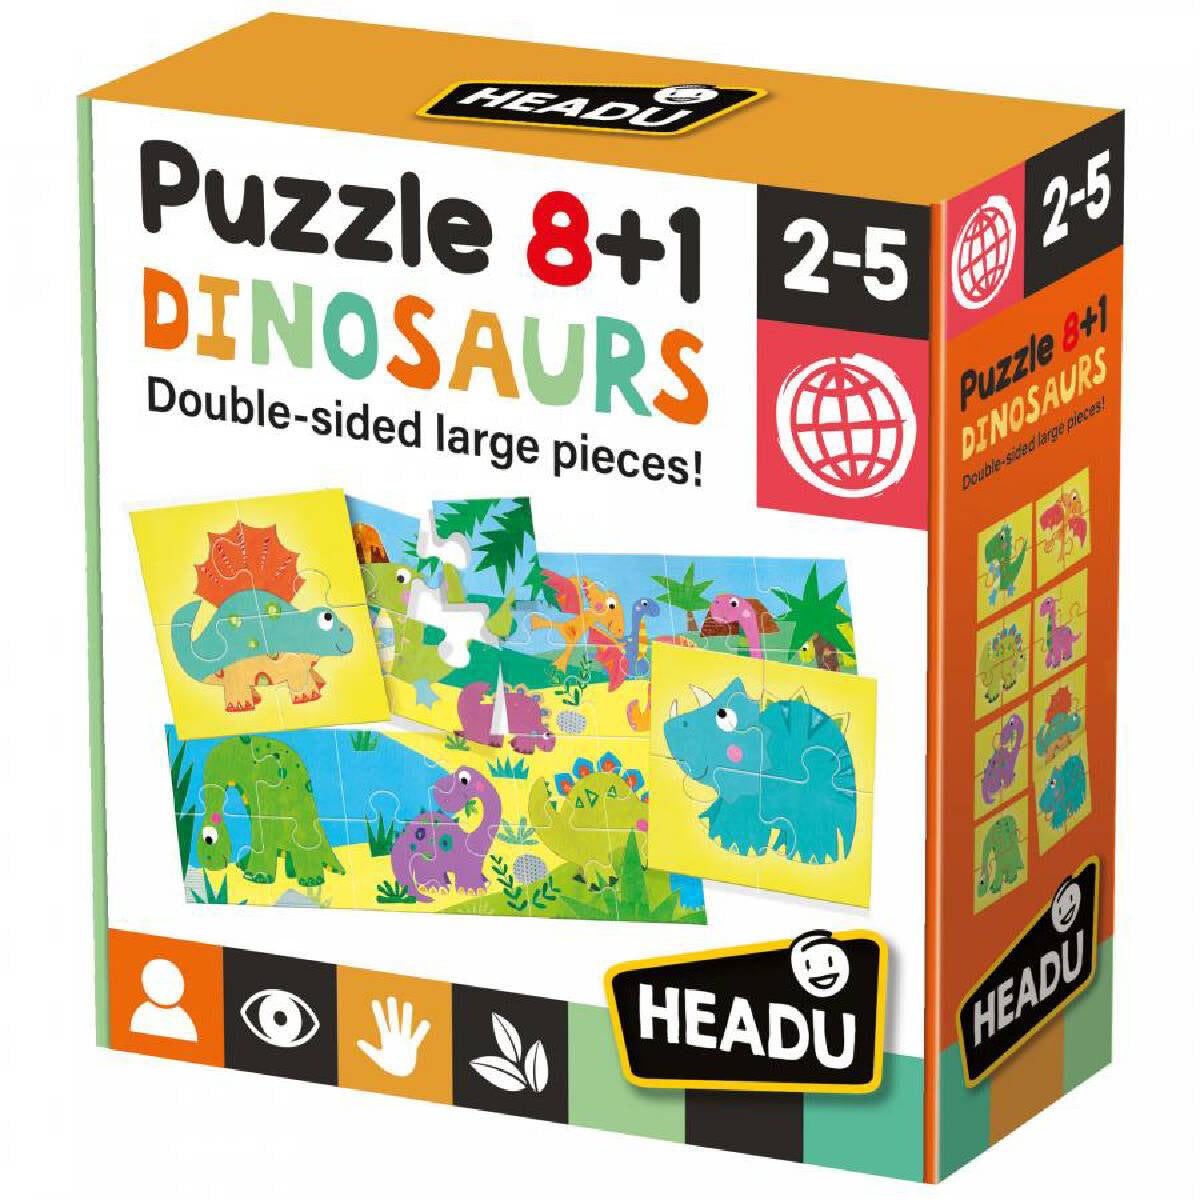 View the best prices for: headu puzzle 8+1 dinosaurs